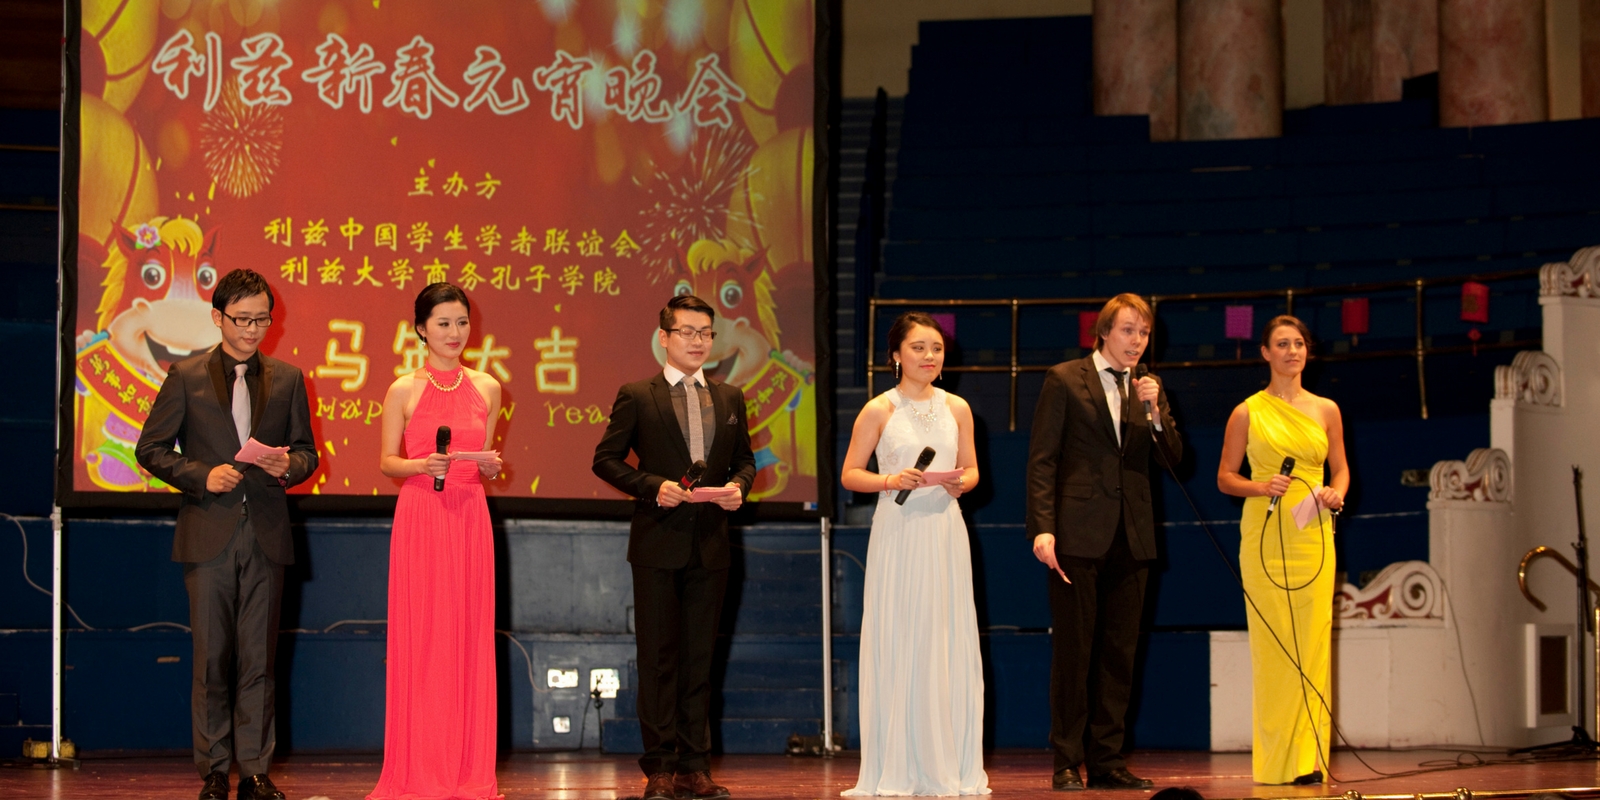 Six glamorous people on stage presenting the Chinese New Year Gala